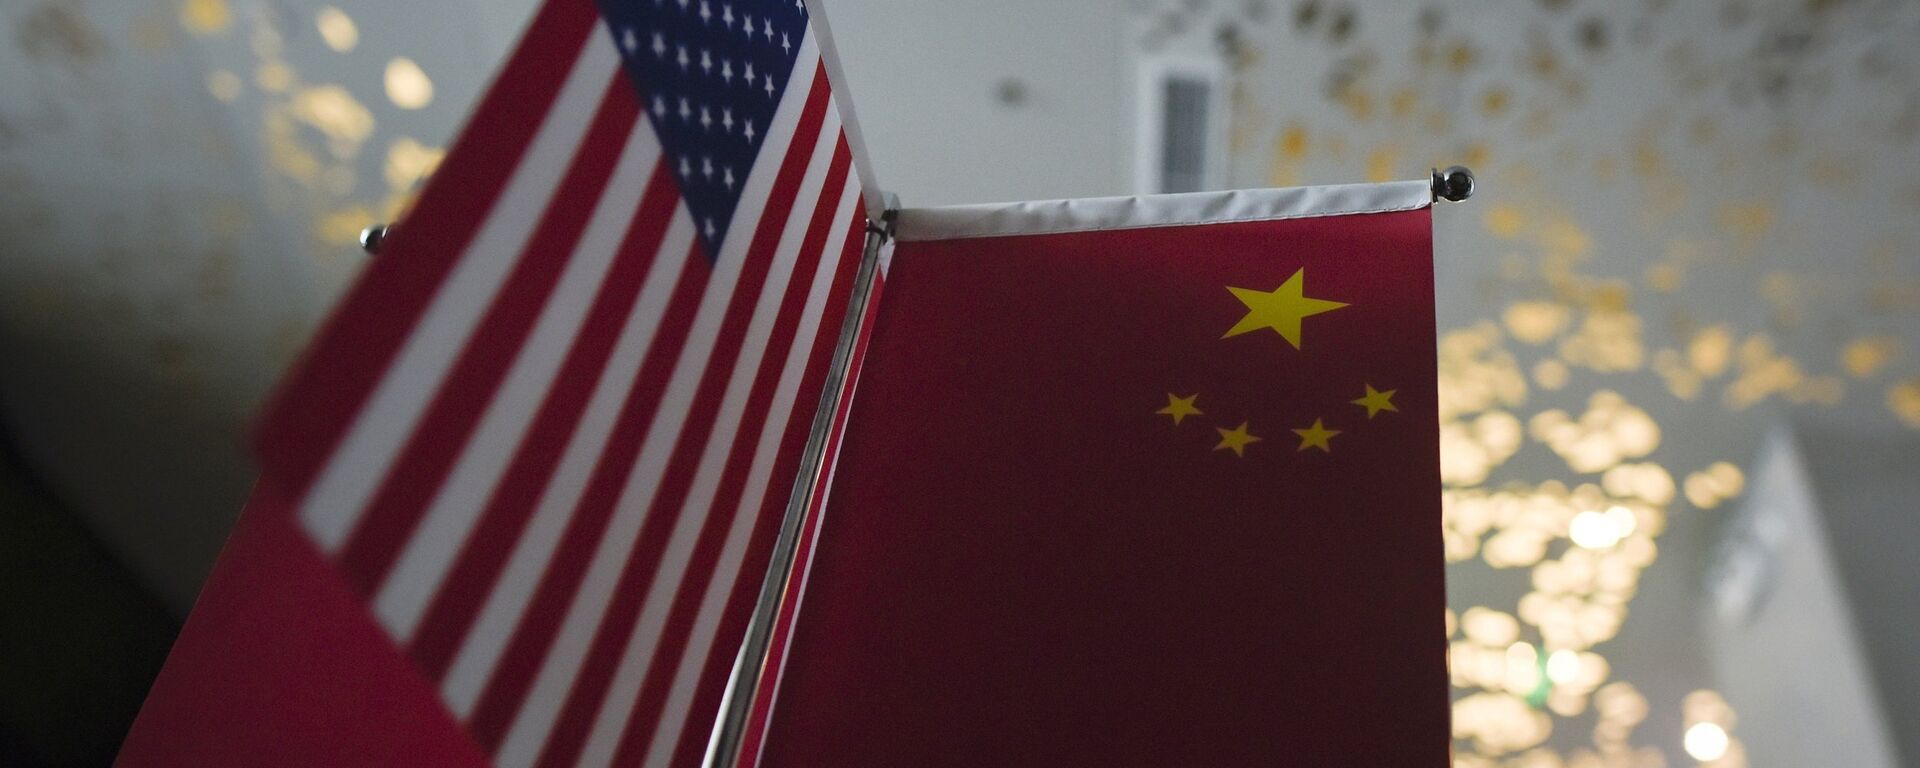 Chinese flags and American flags - 俄羅斯衛星通訊社, 1920, 19.03.2021